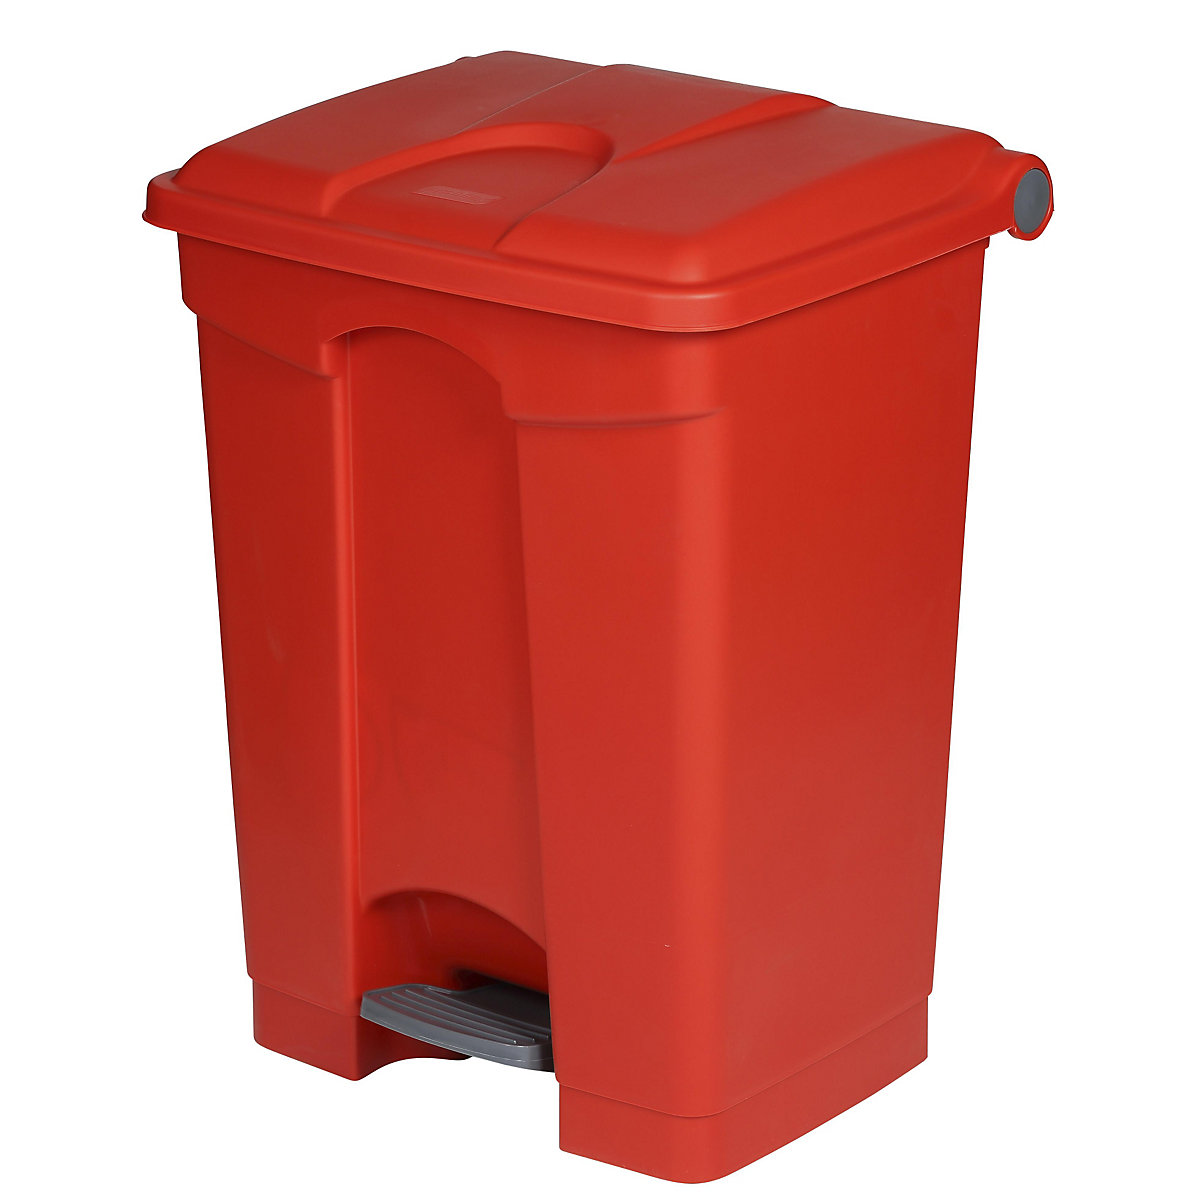 EUROKRAFTbasic – Pedal waste collector, capacity 70 l, WxHxD 505 x 675 x 415 mm, red